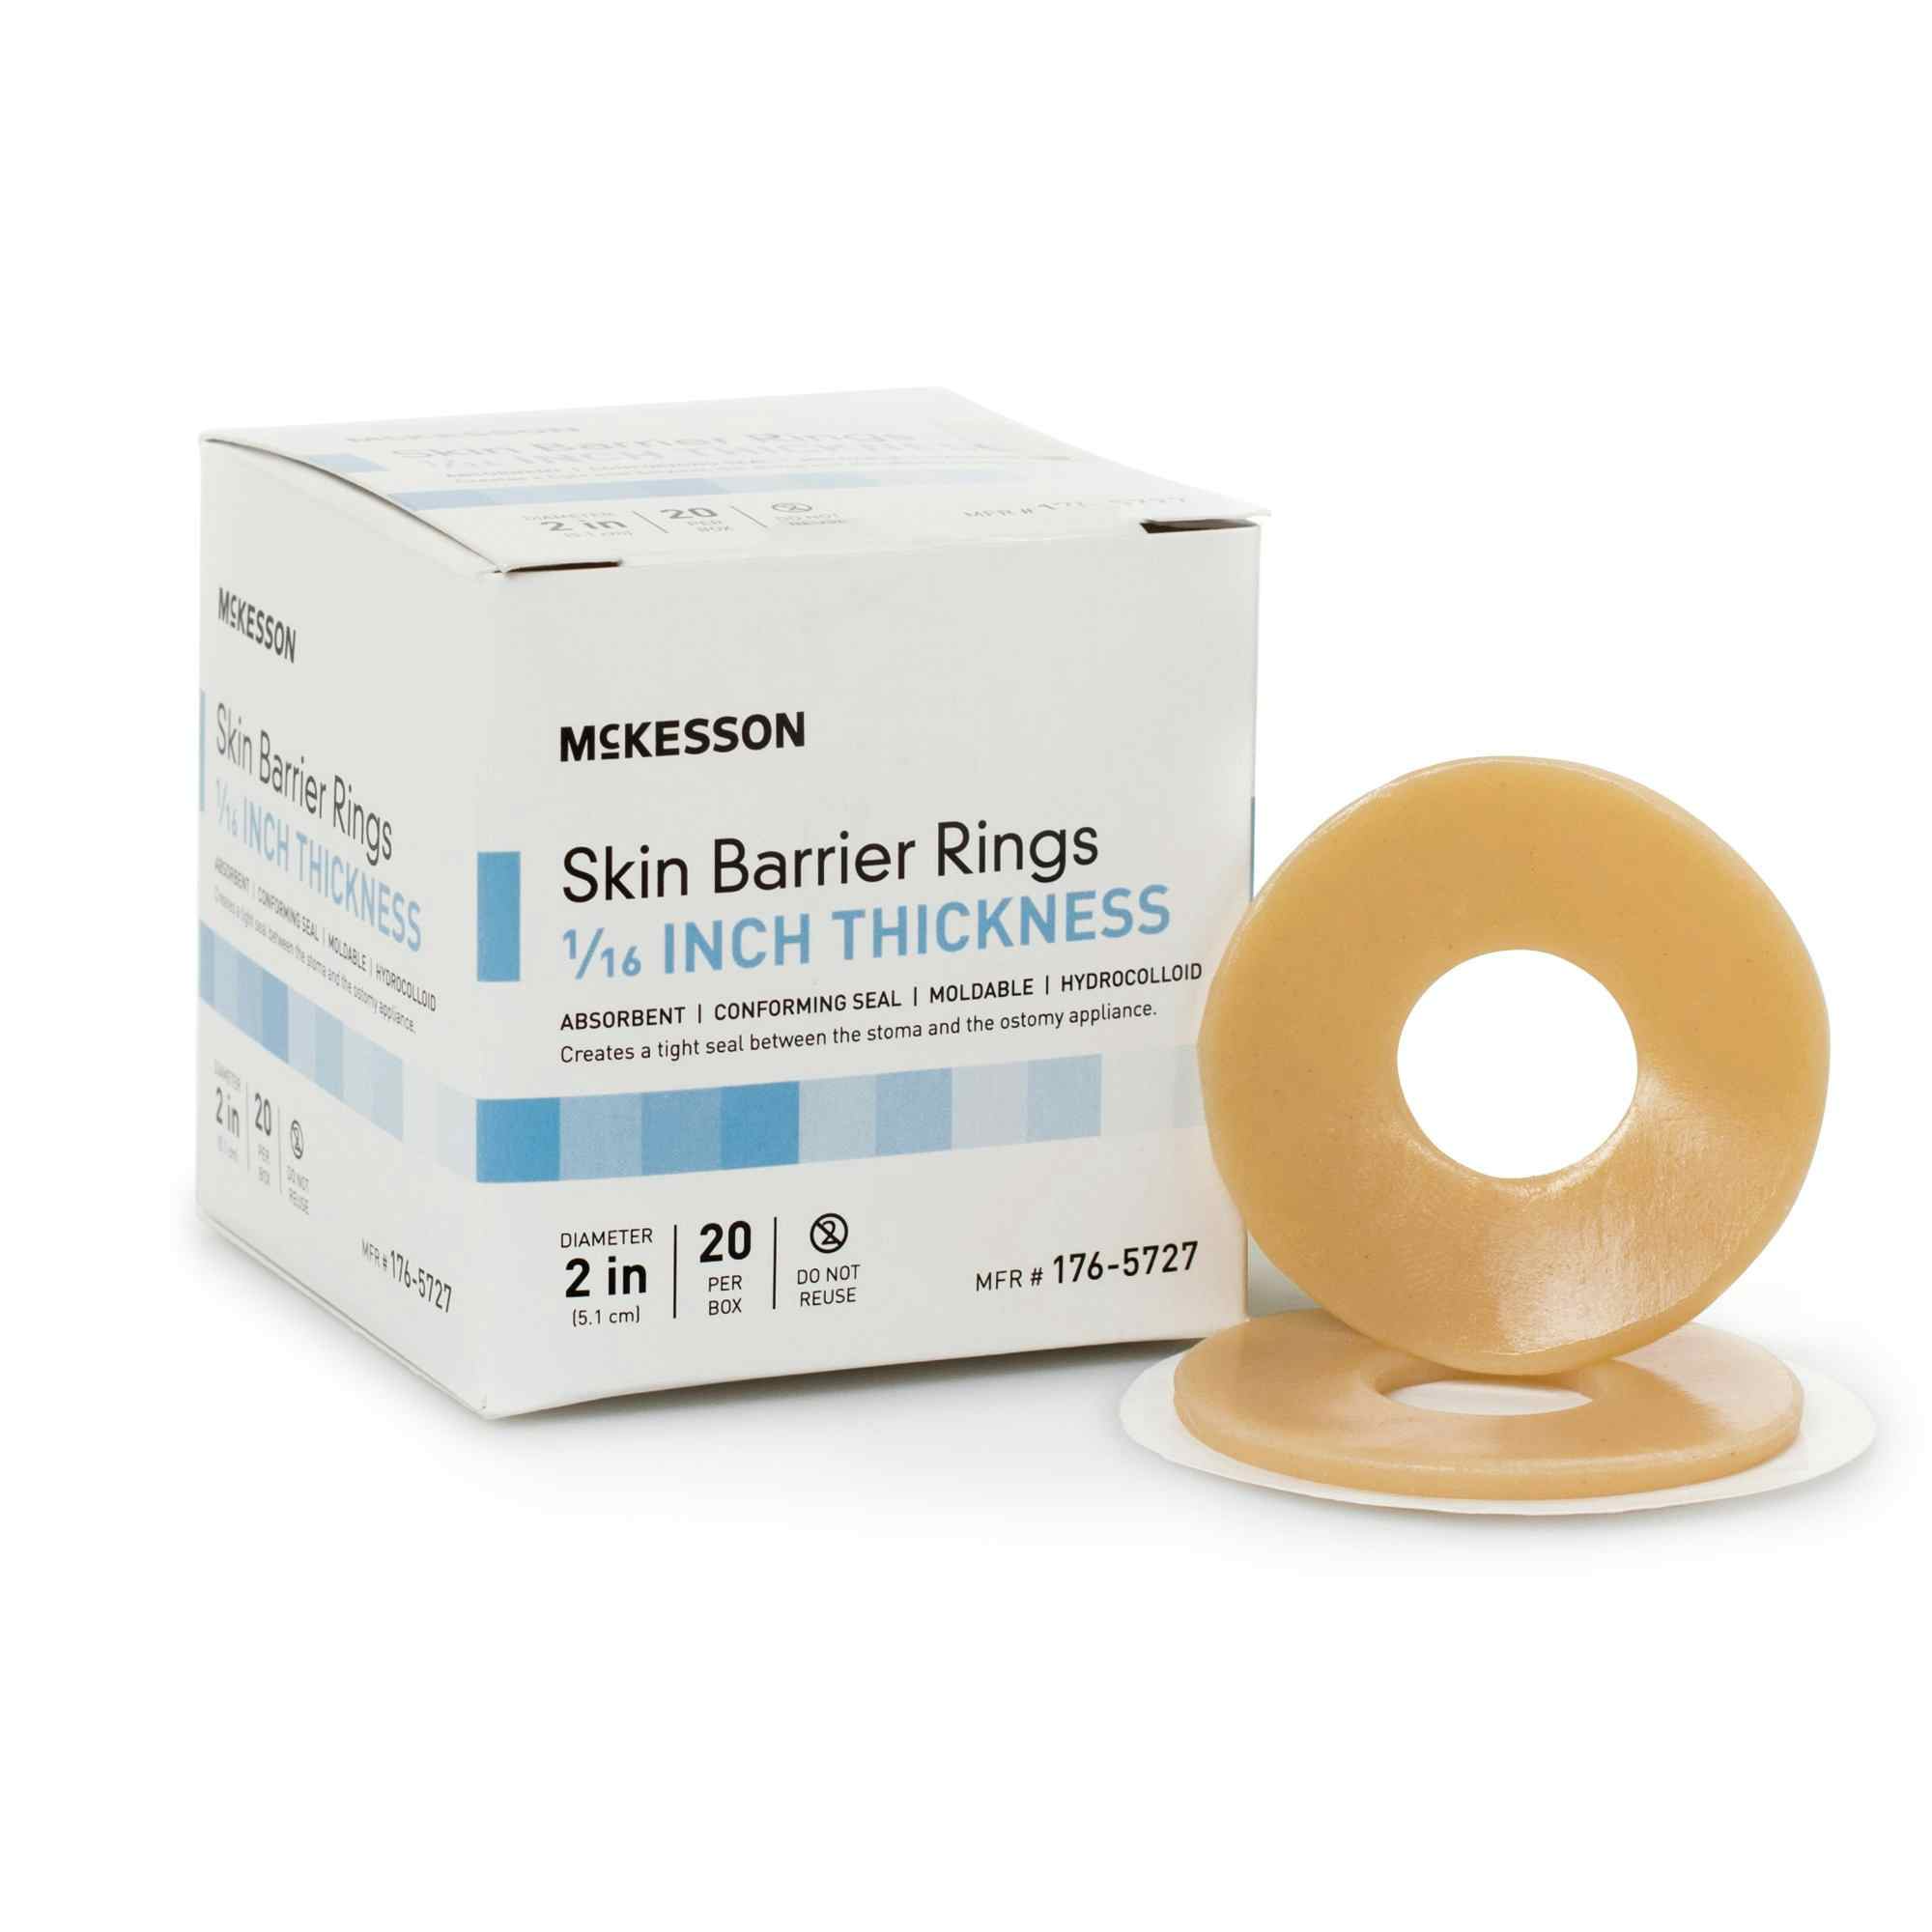 McKesson Skin Barrier Rings, 1/16" Thickness, 176-5727, 1 Each